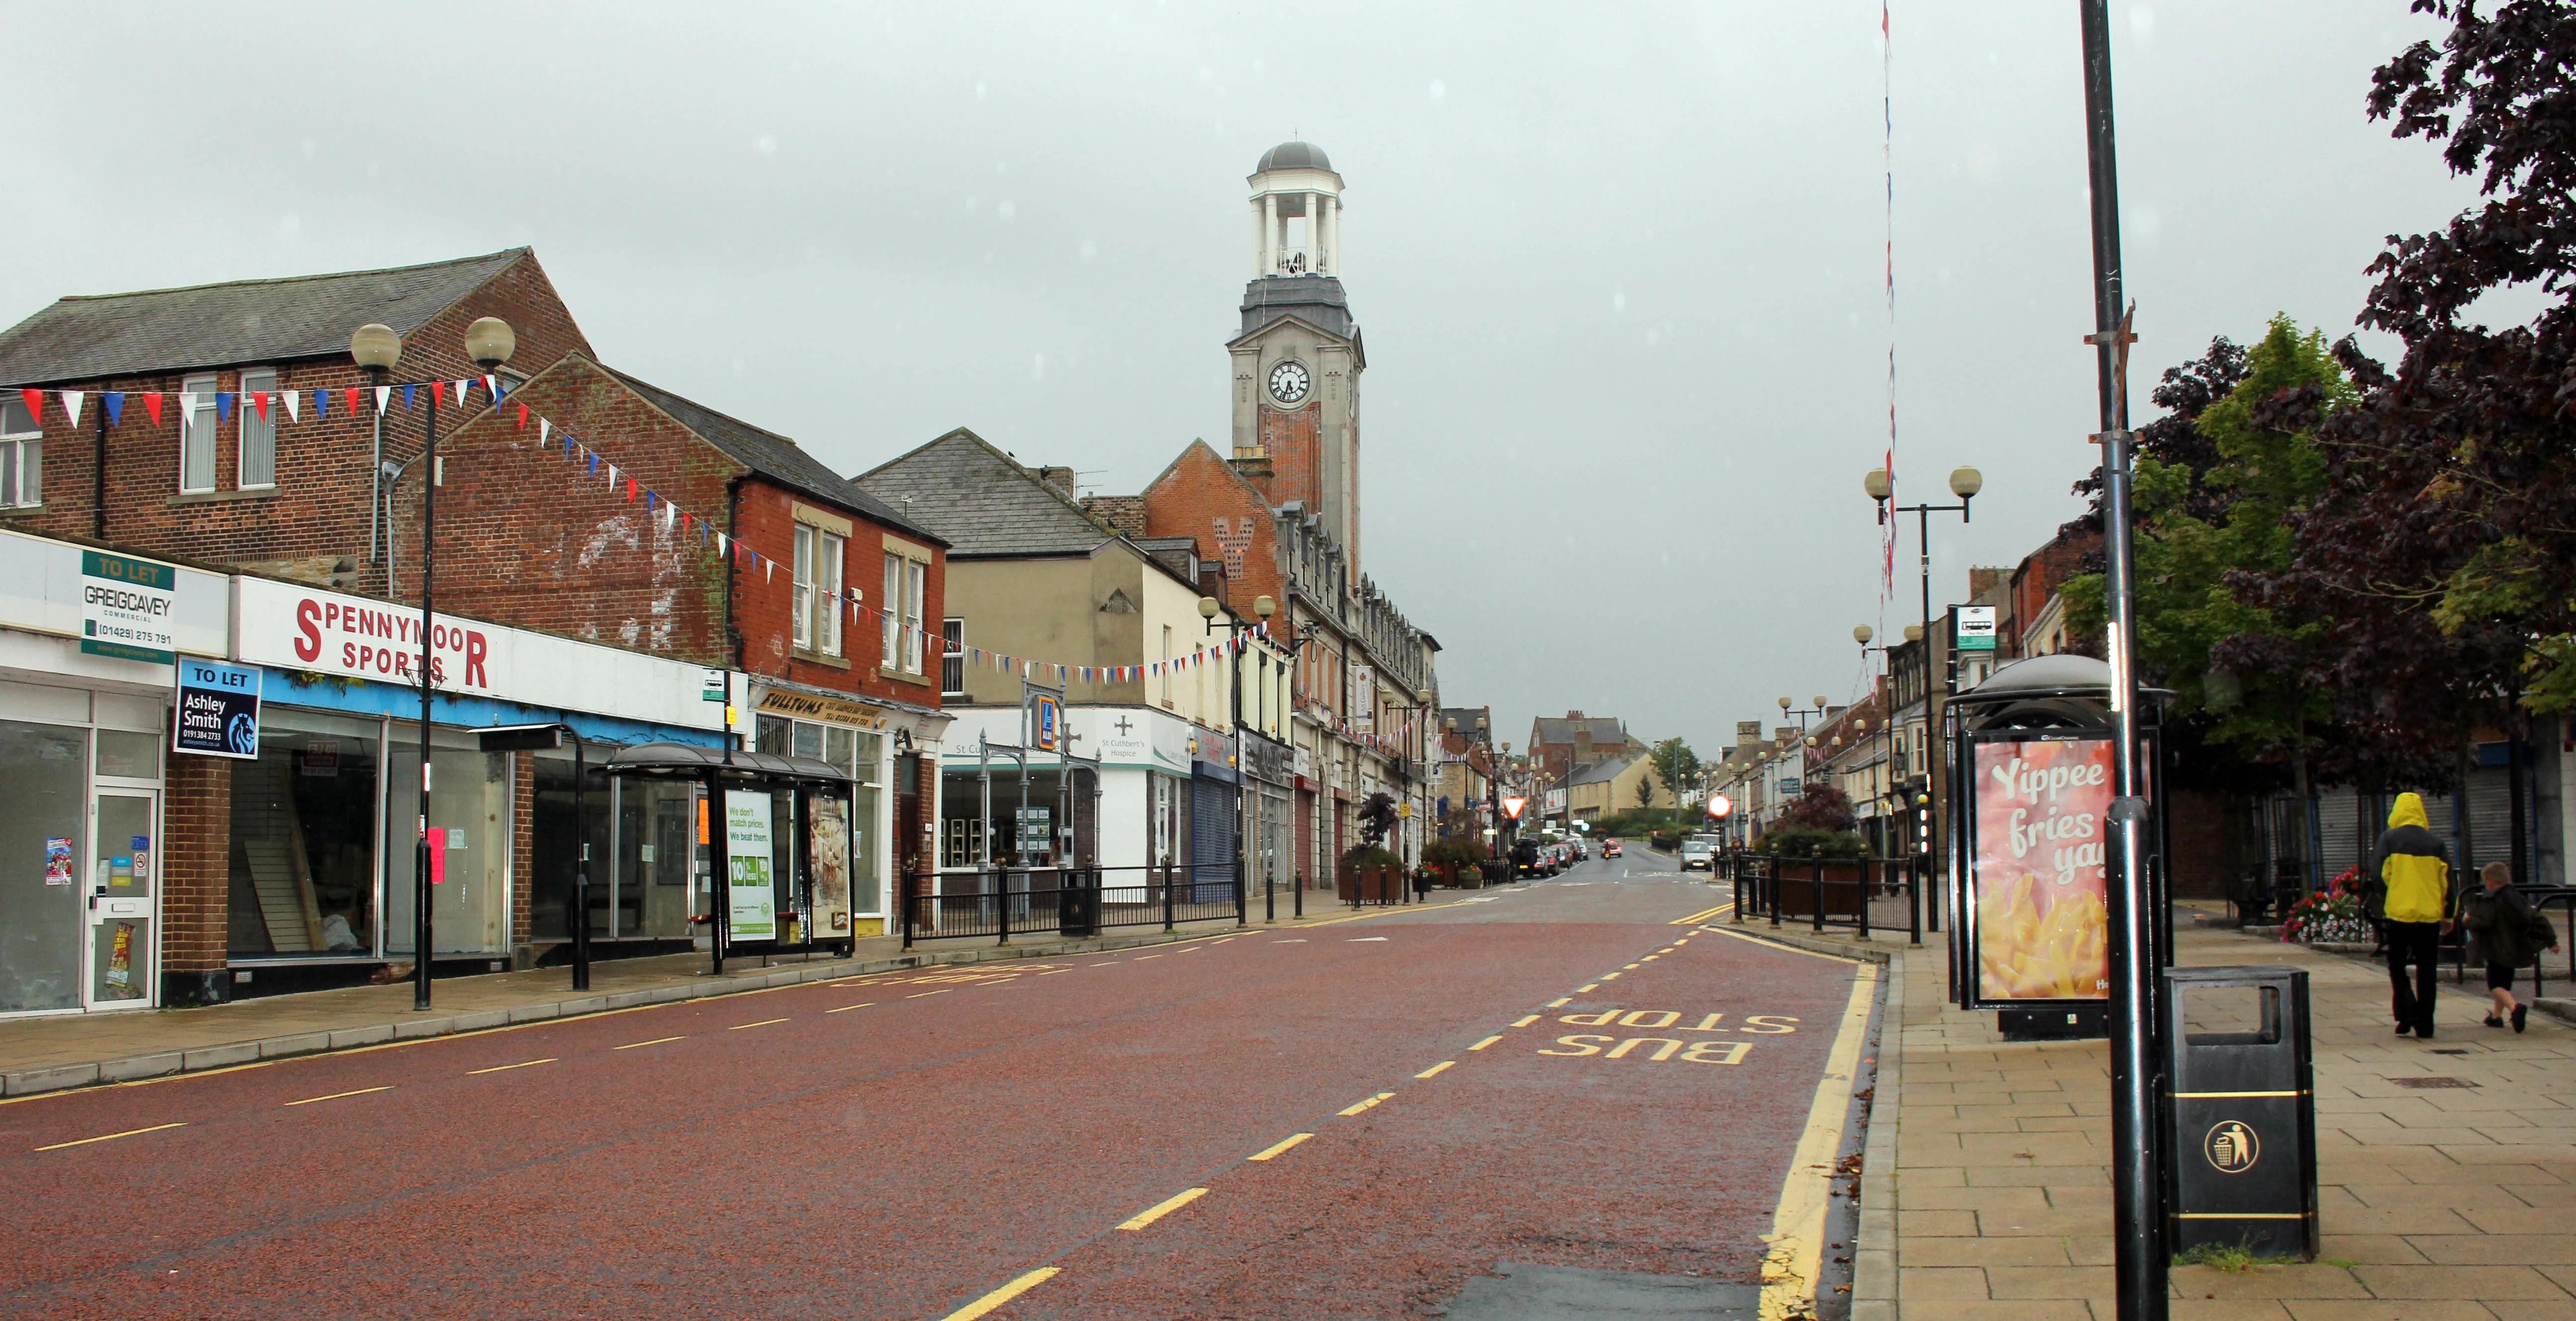 Spennymoor town centre